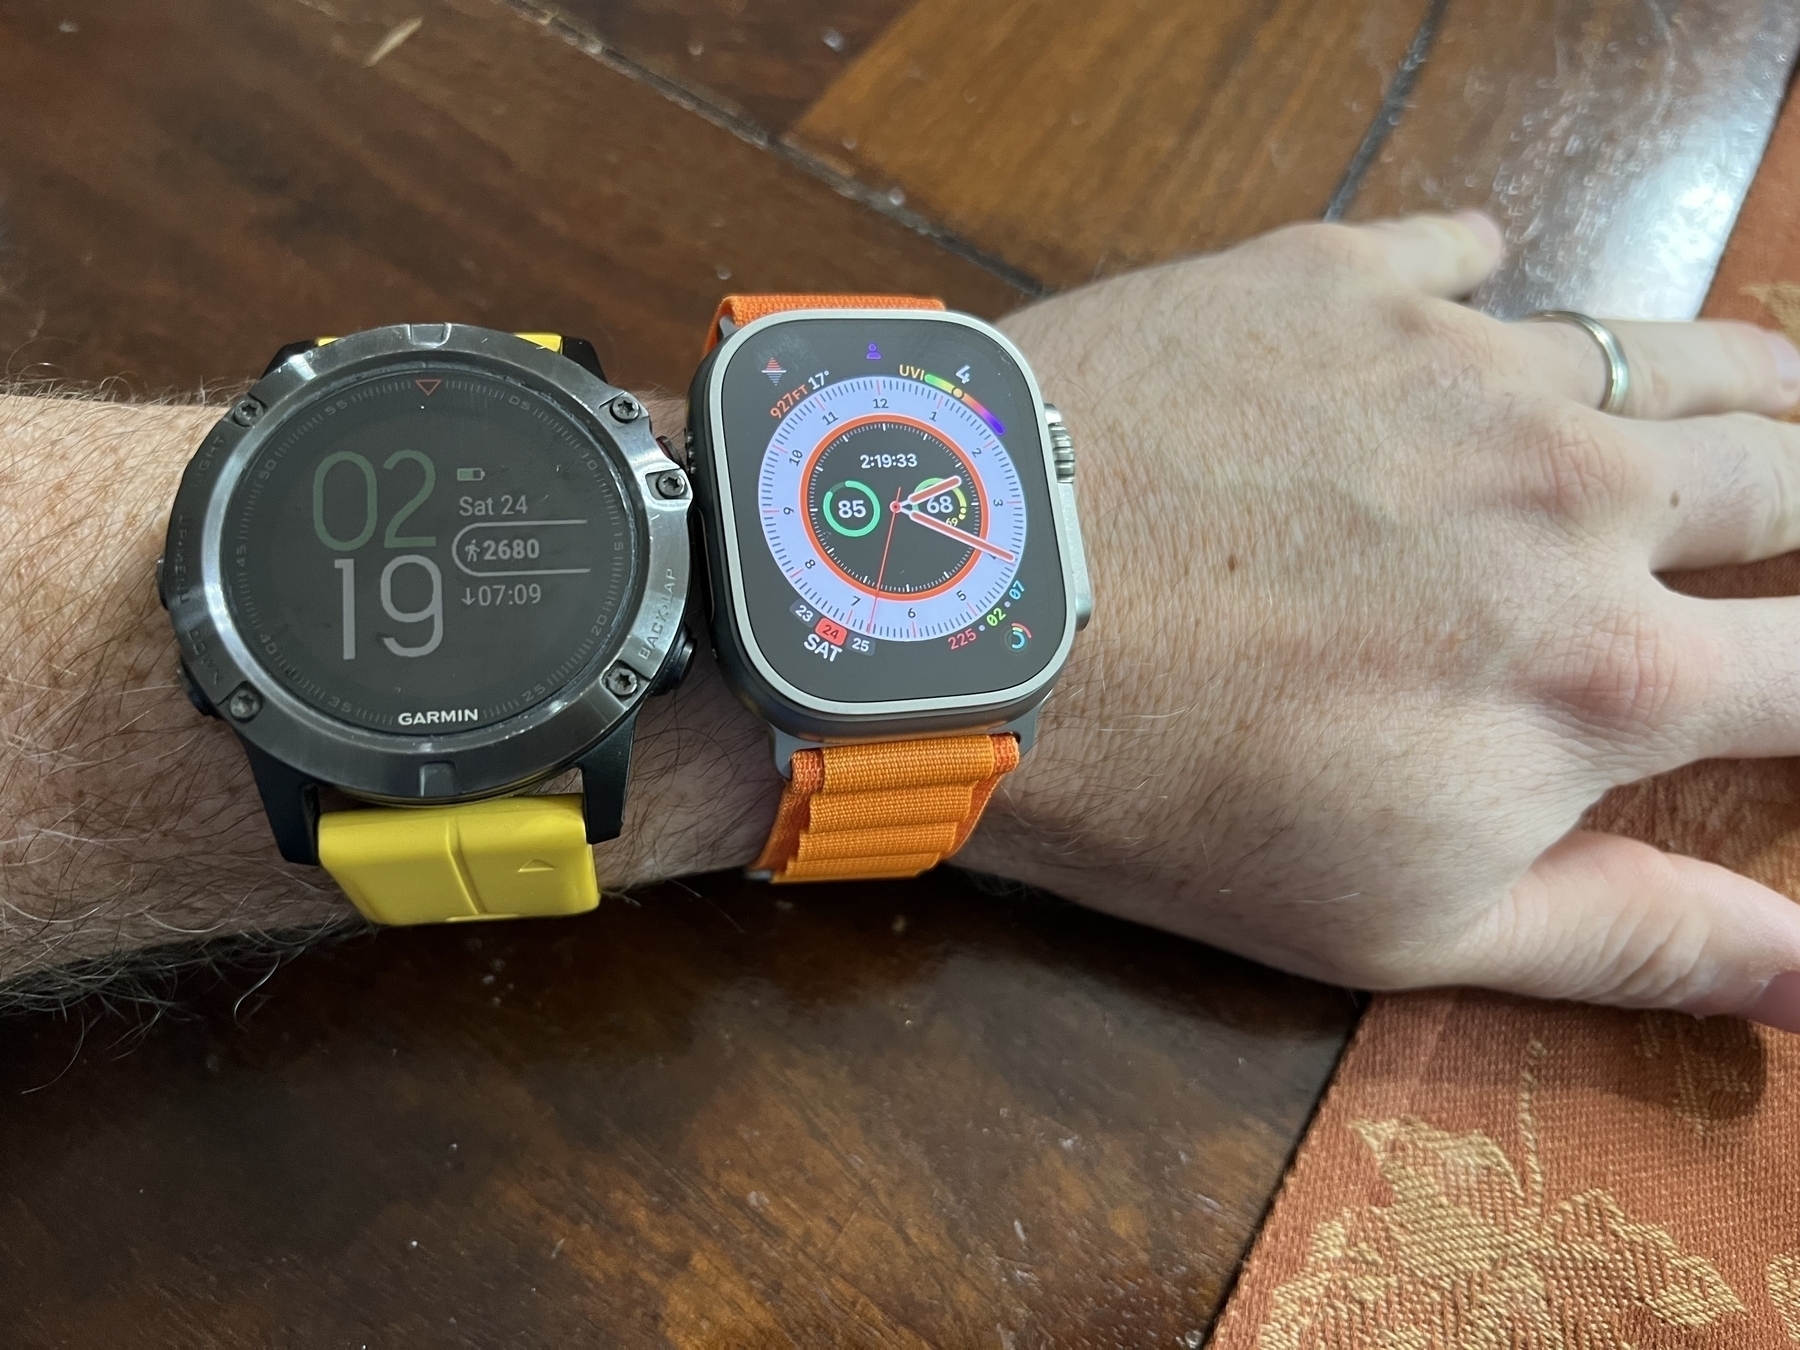 Two smartwatches on a wrist display different time and fitness information, resting on a wooden surface next to a patterned cloth.